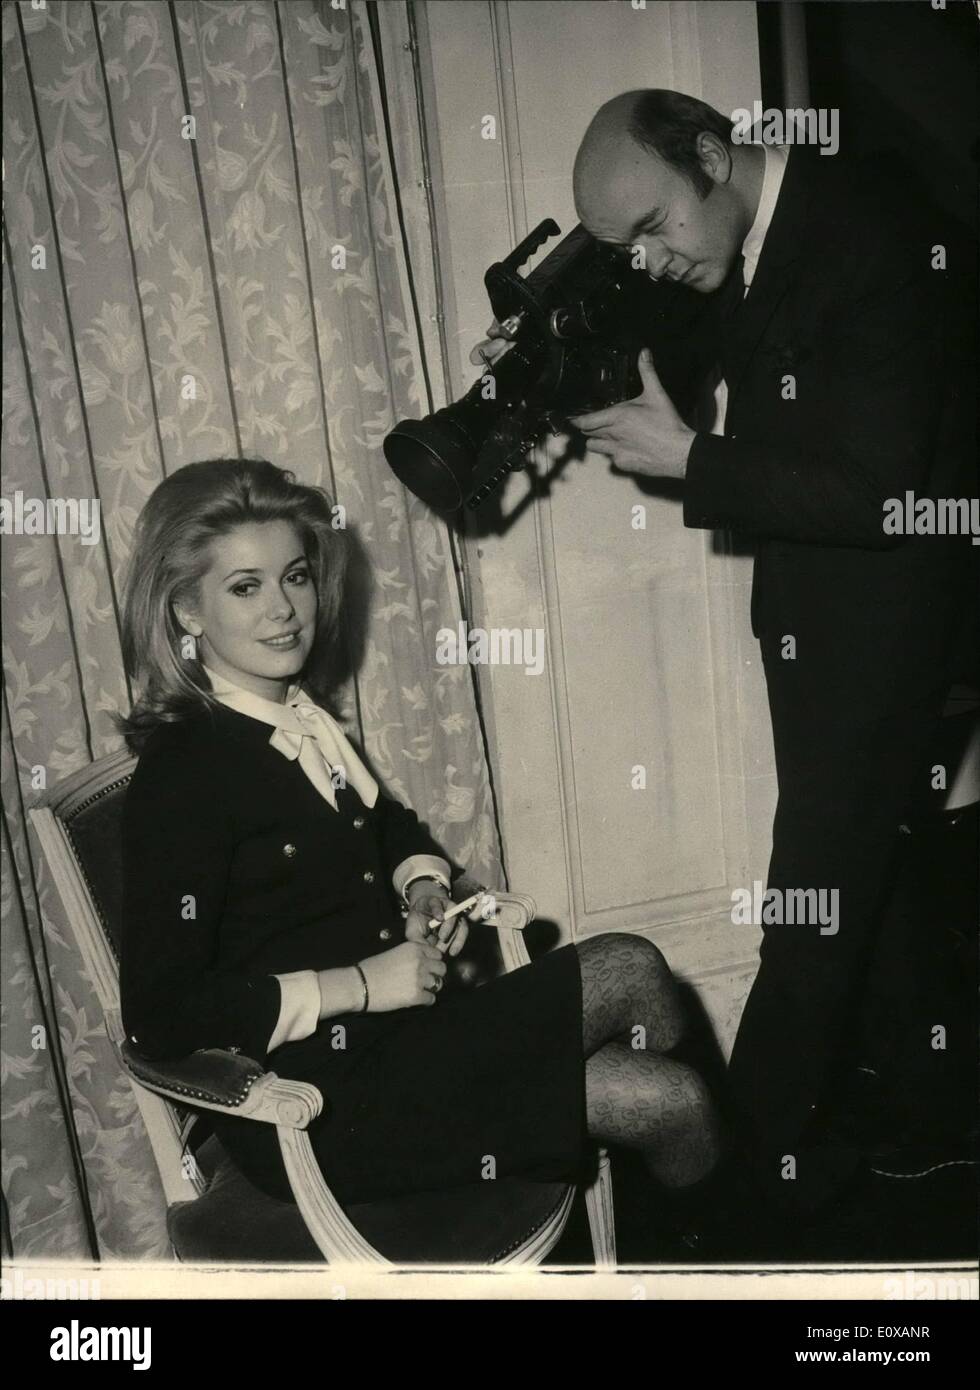 Jan. 01, 1966 - Jean Paul won the ''Prix Louis Delluc'' for his movie ''The Chateau Life'' in which Catherine Deneuve is a star. Vladimir Lenin and Josef Stalin After the October Revolution Stock Photo